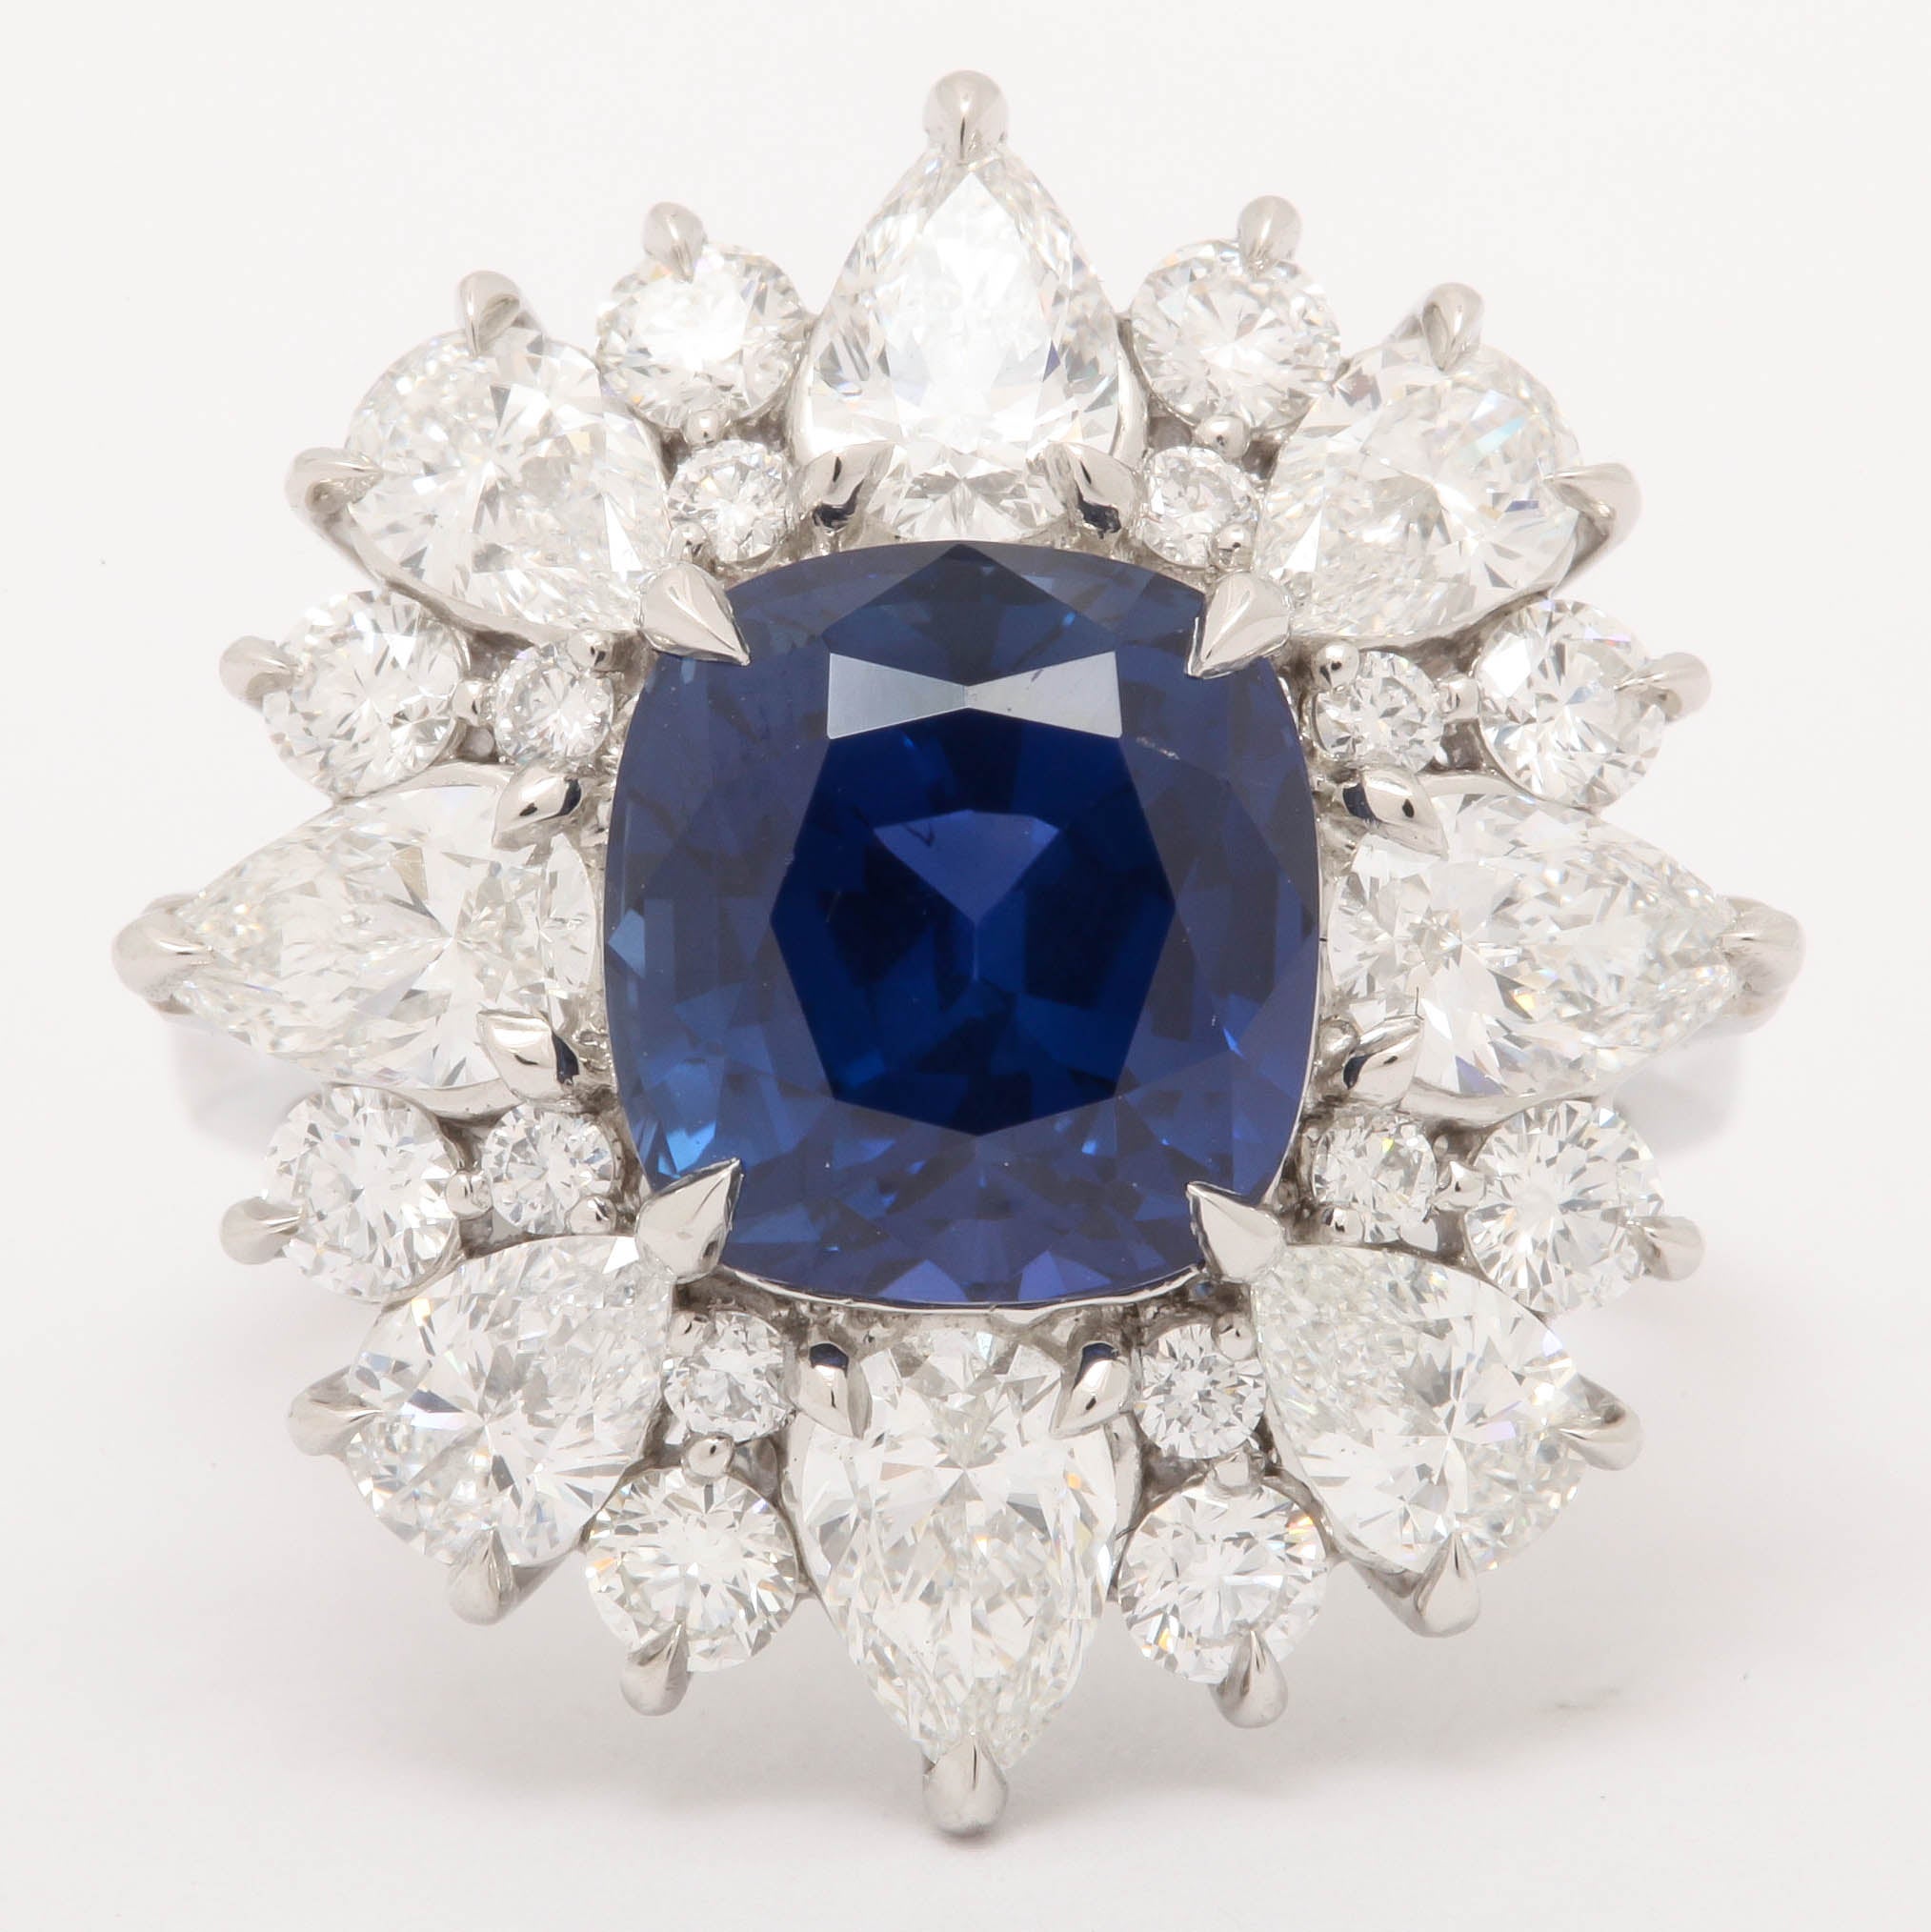 This magnificent sapphire and diamond ring, features 5.98 Carat Unheated Burmese Sapphire, GIA Certified. set with 3.04 Carats of multi shape diamonds.